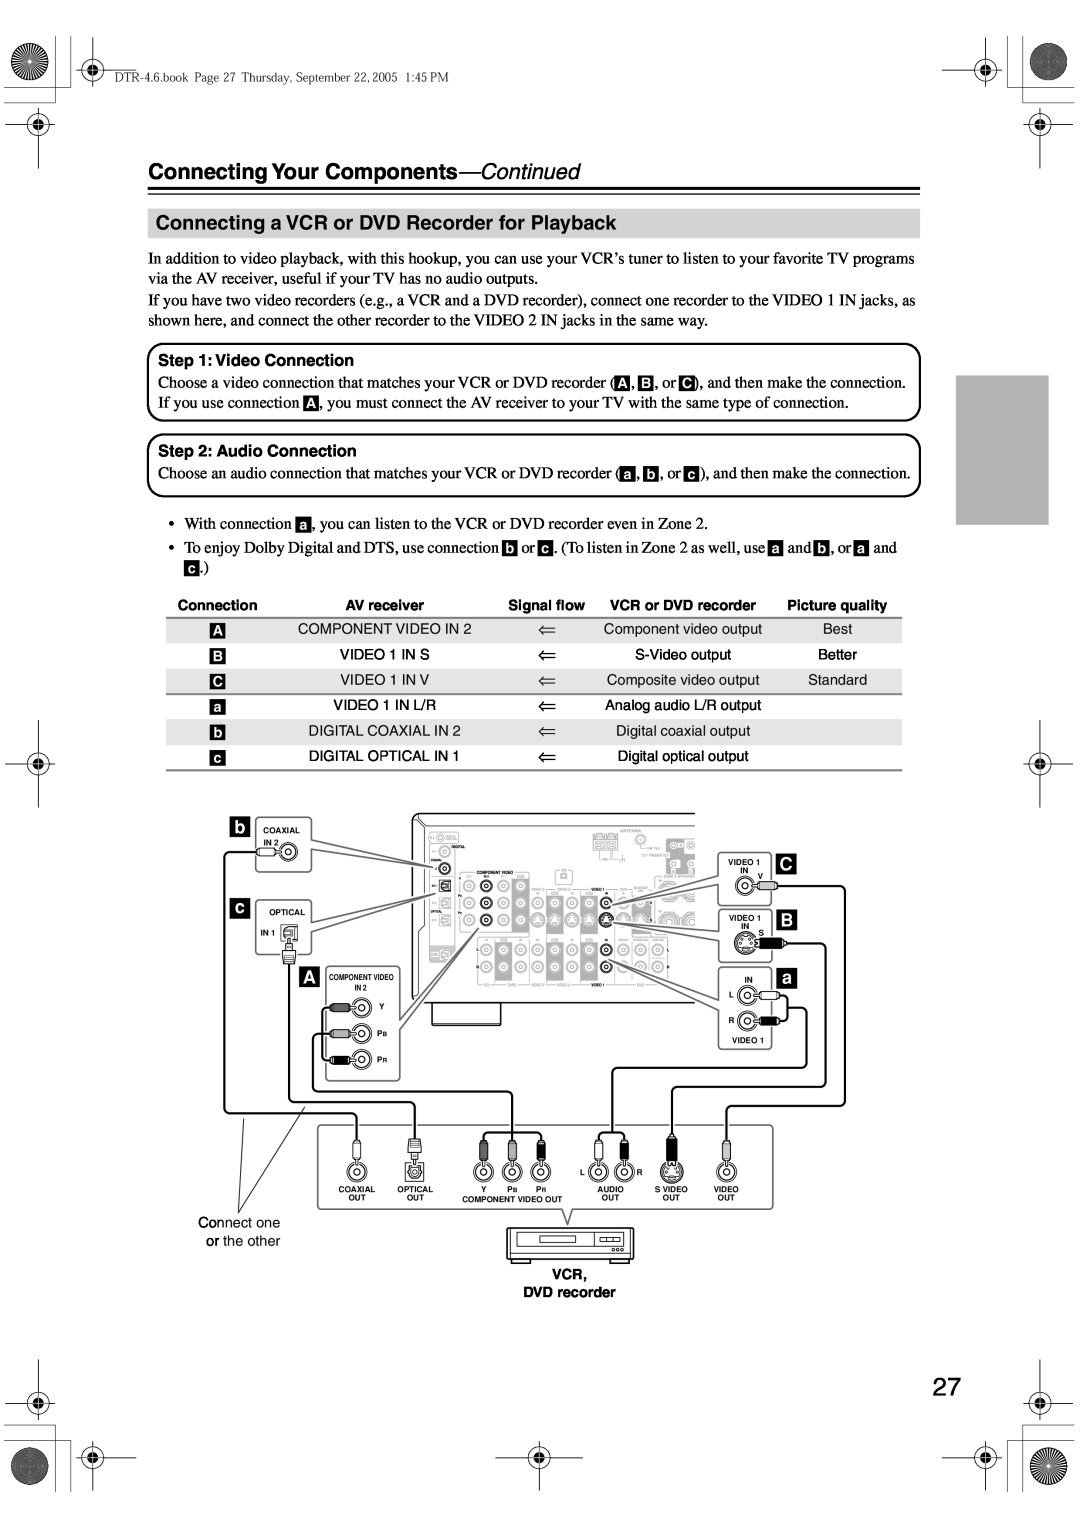 Integra DTR-4.6 instruction manual Connecting a VCR or DVD Recorder for Playback, Connecting Your Components—Continued 